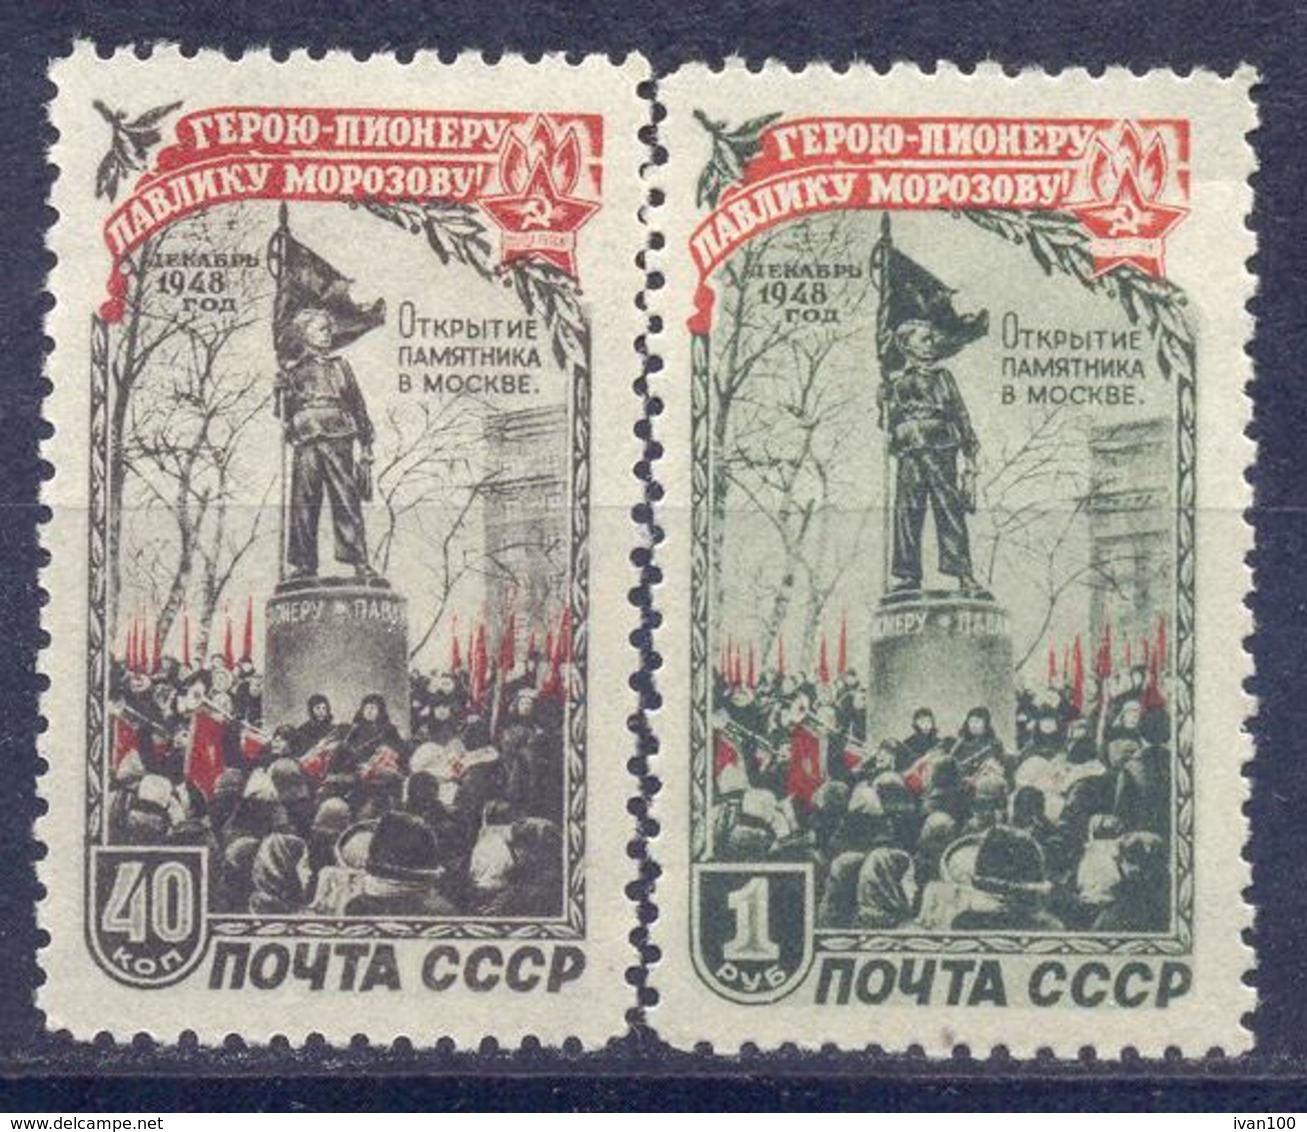 1950. USSR/Russia, Unveiling Of Monument To Pavlik Morosov, Mich.1448/49, 2v, Mint/* - Nuovi